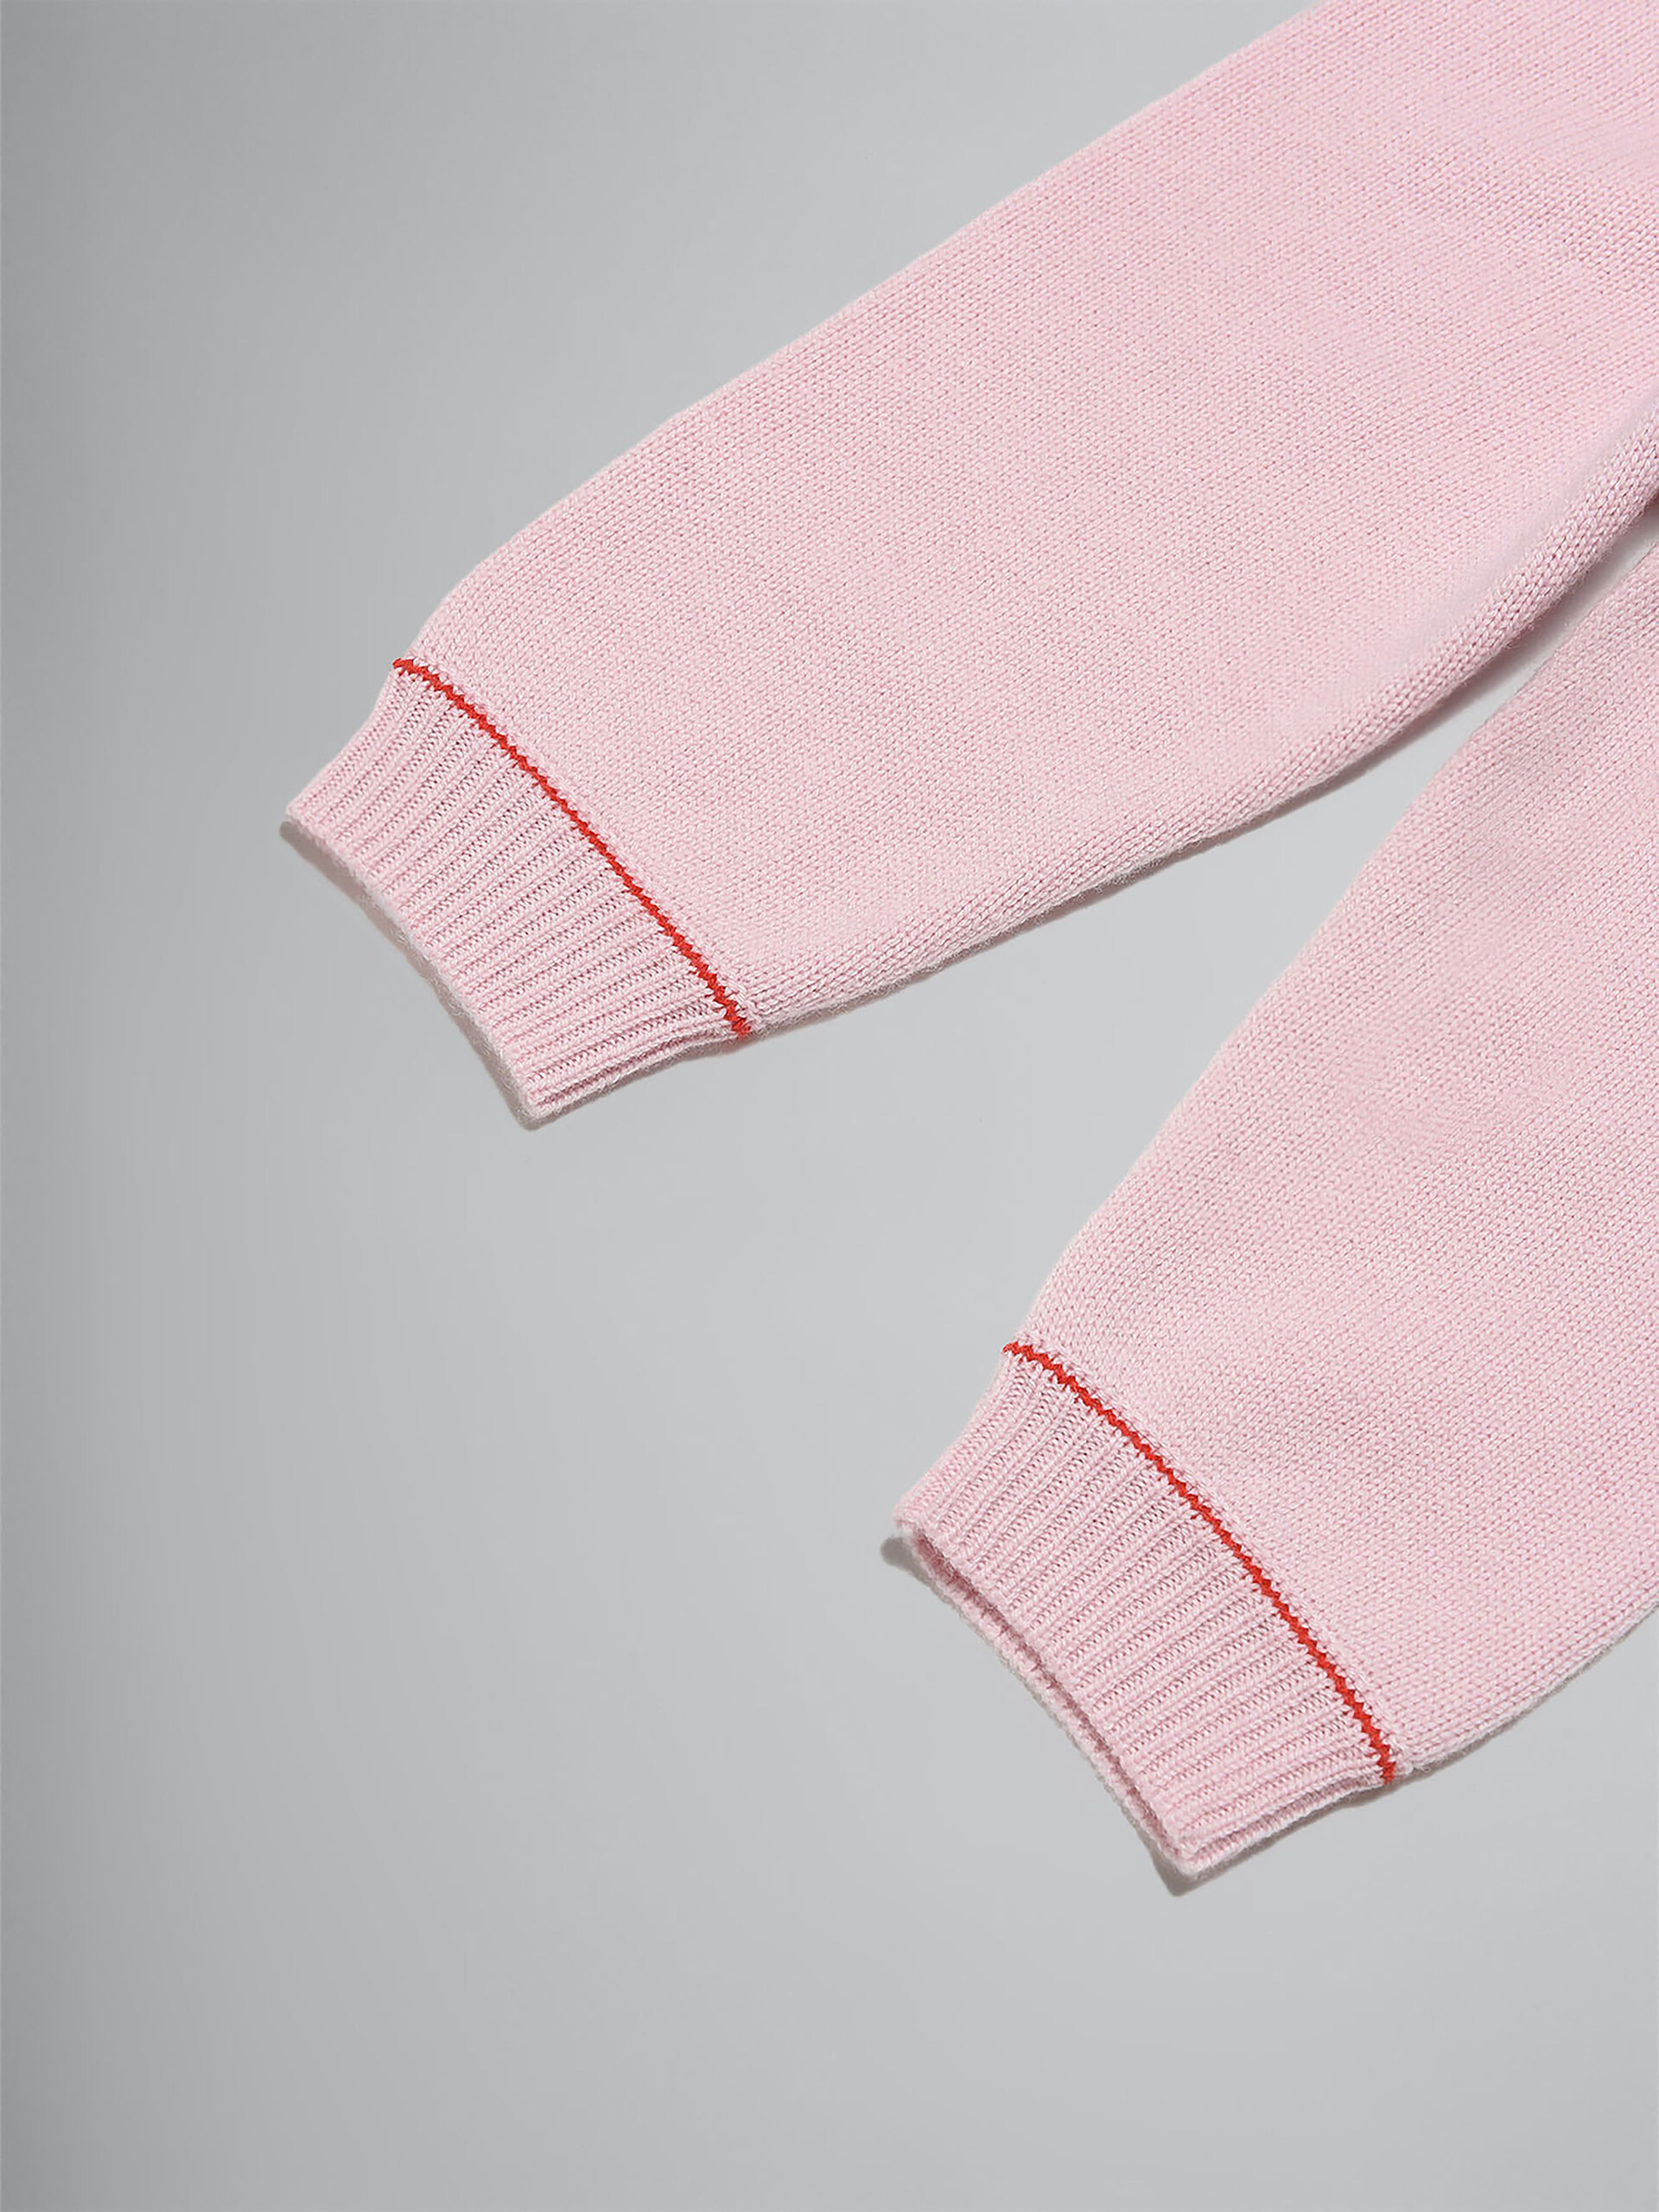 Pink wool and cashmere trousers with logo - Pants - Image 4